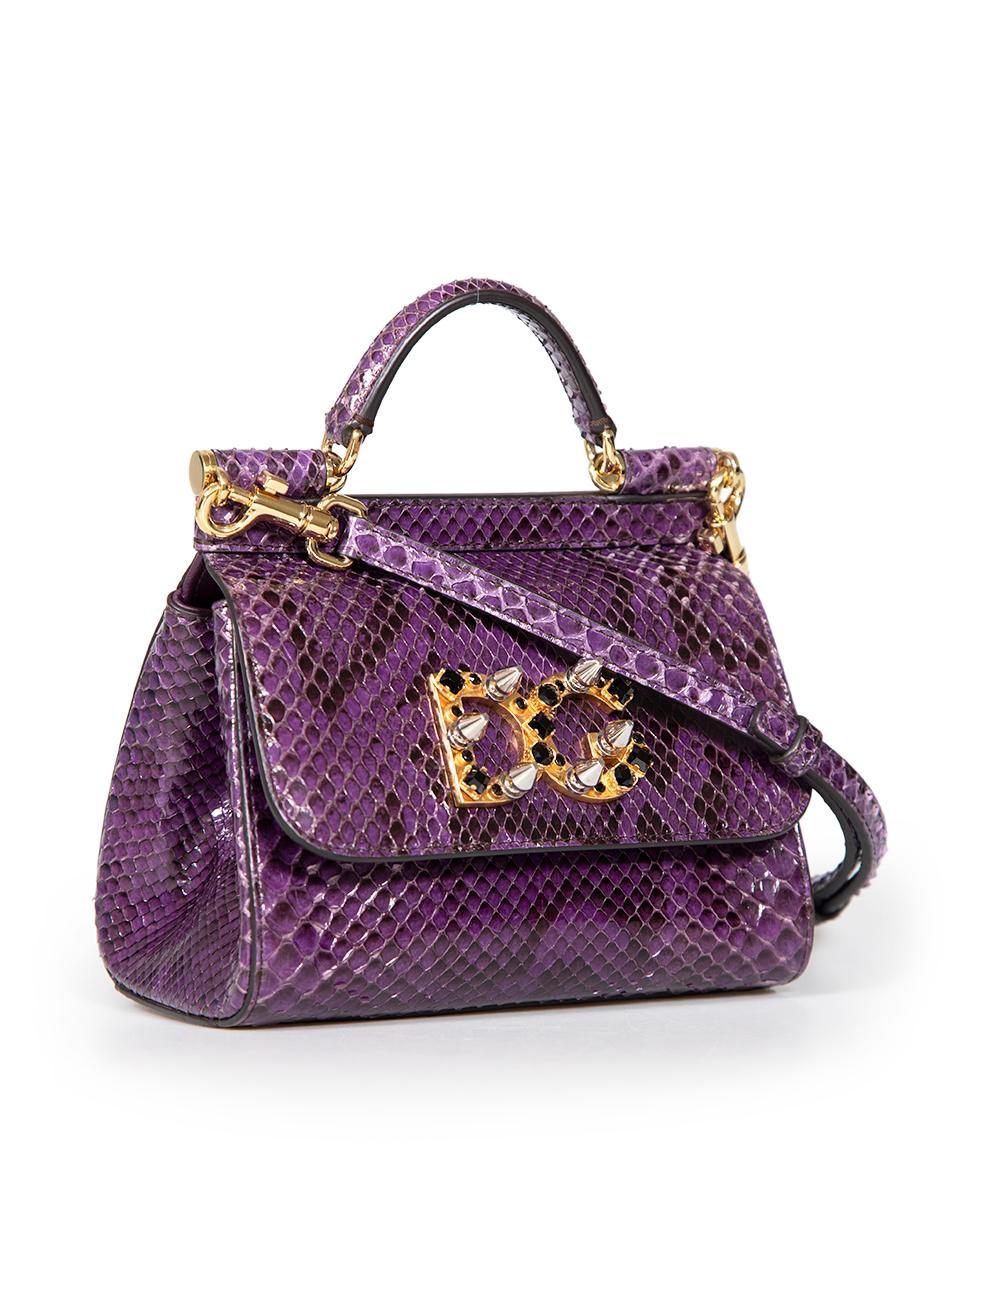 Dolce & Gabbana Limited Edition Purple Snakeskin Miss Sicily Bag In Good Condition In London, GB